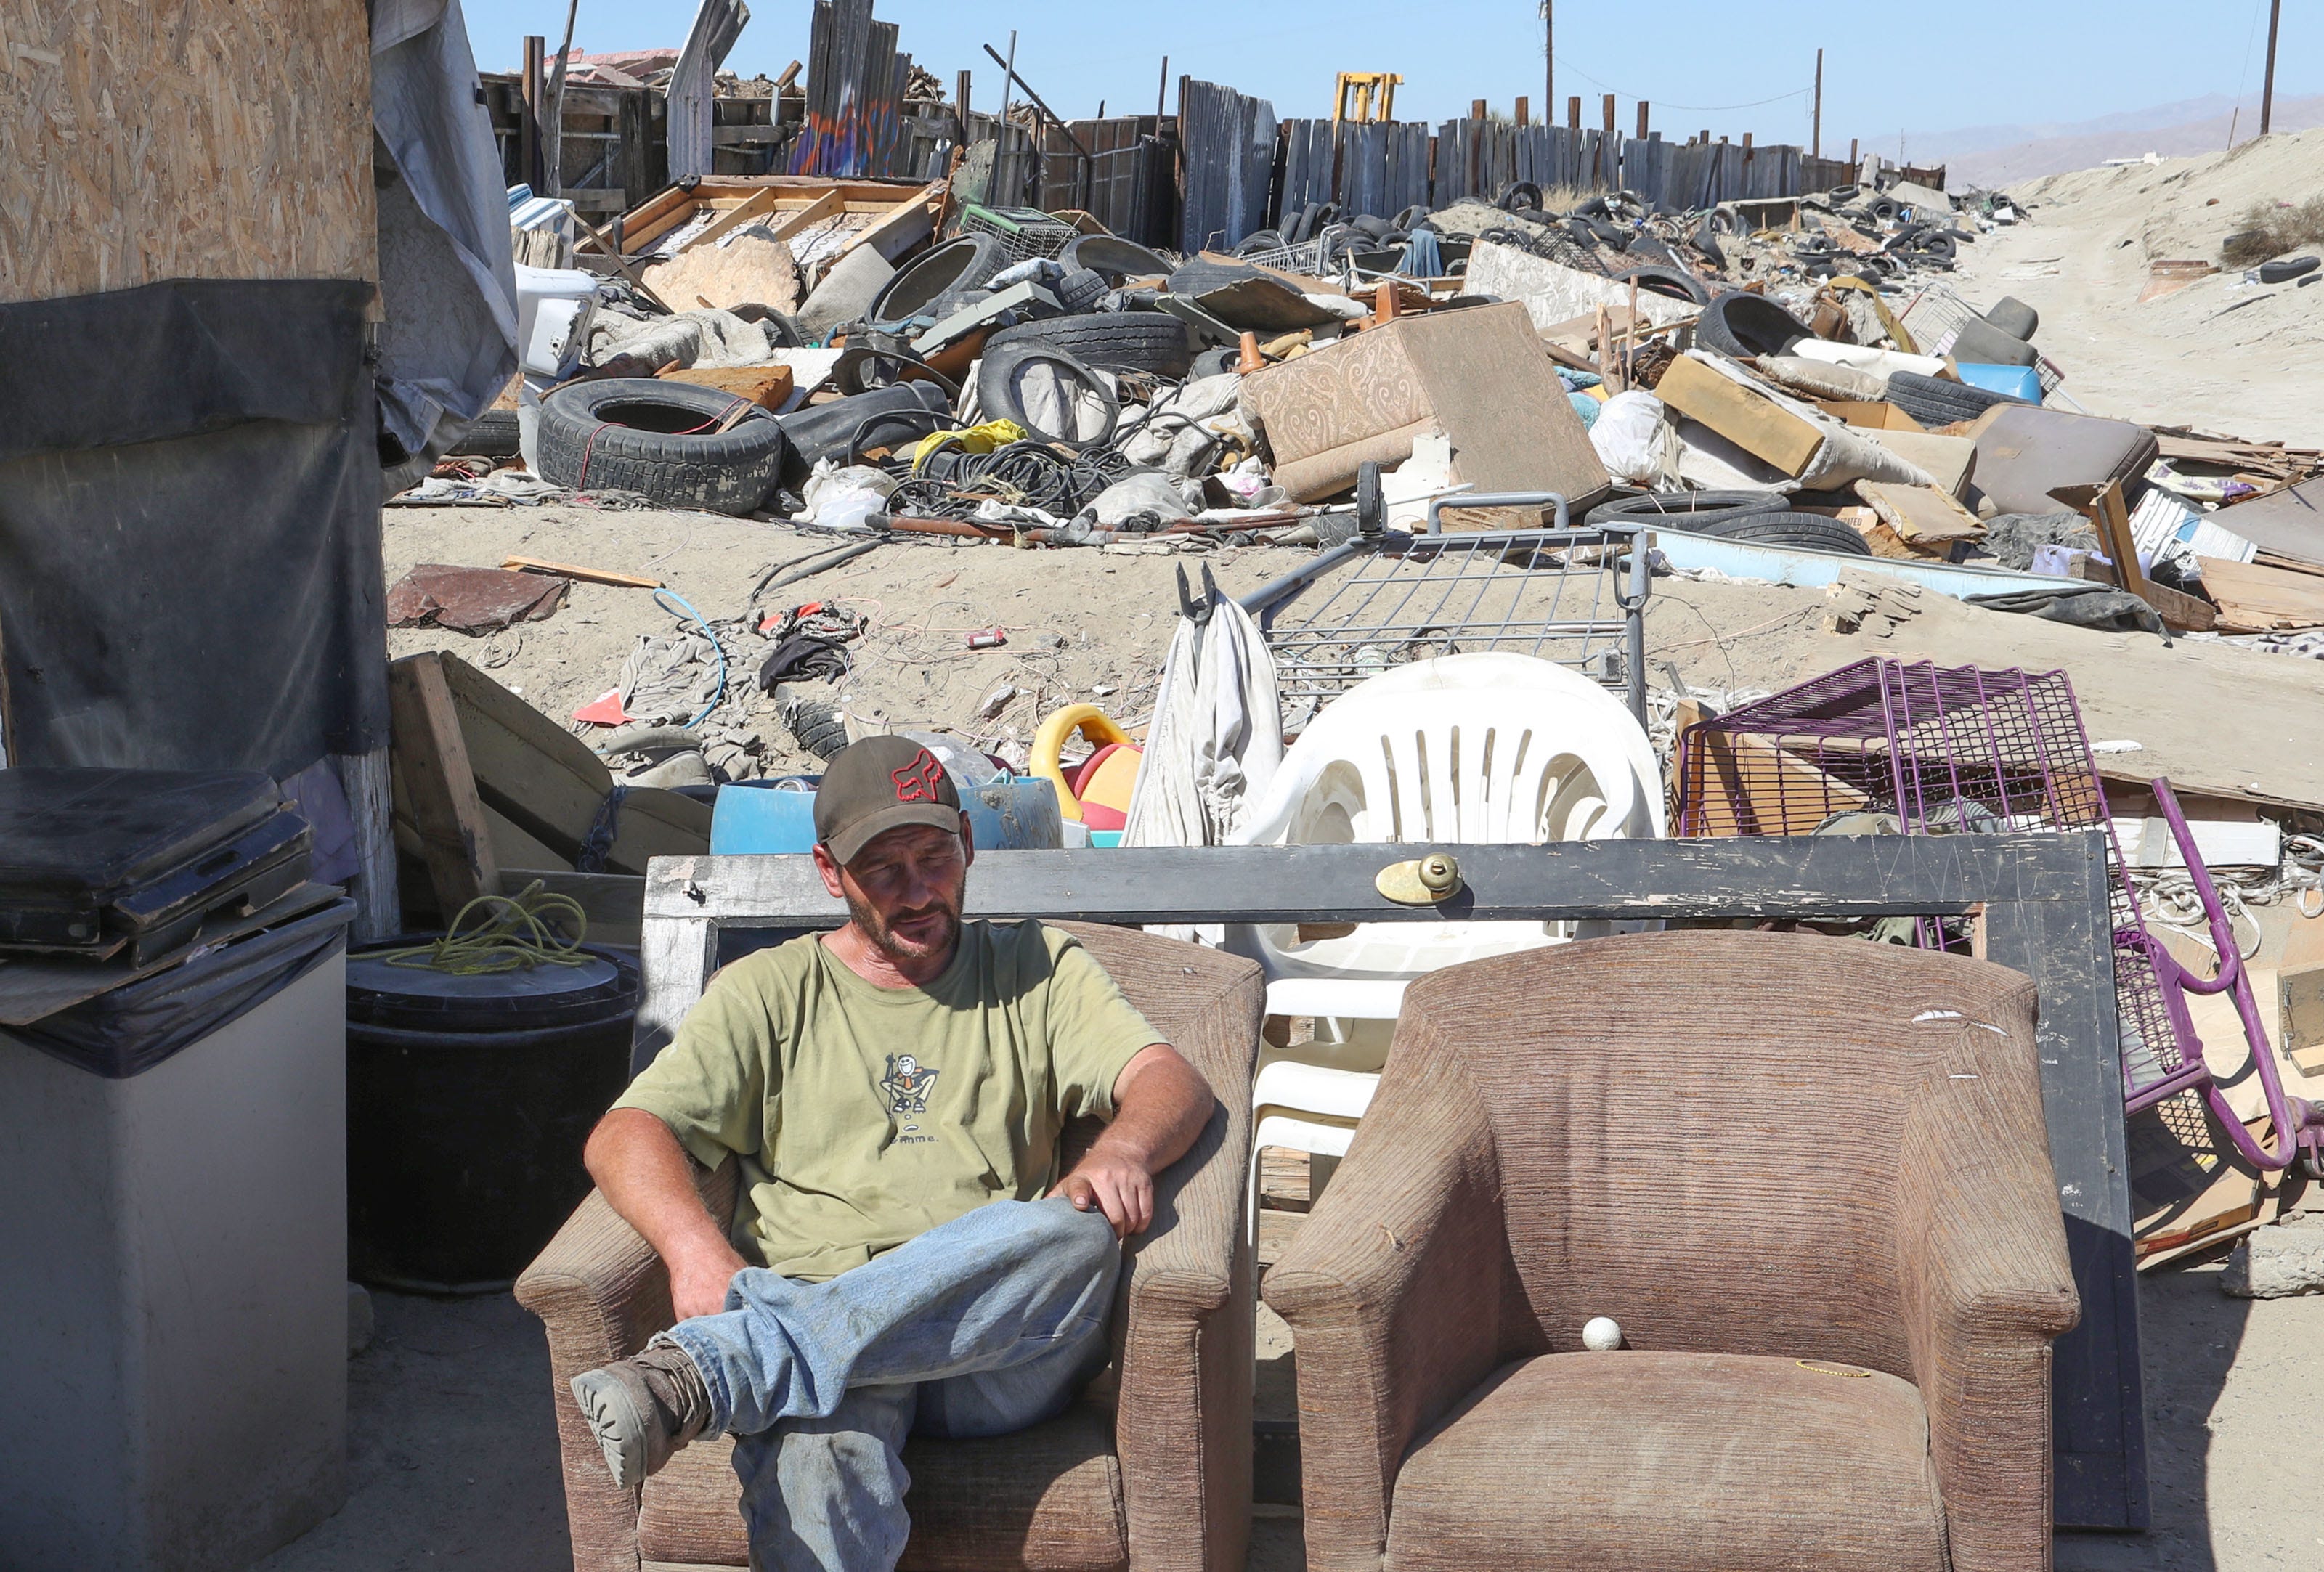 After being evicted from the Coachella encampment, Robert Pruitte was living in this nearby alleyway in October of 2018.